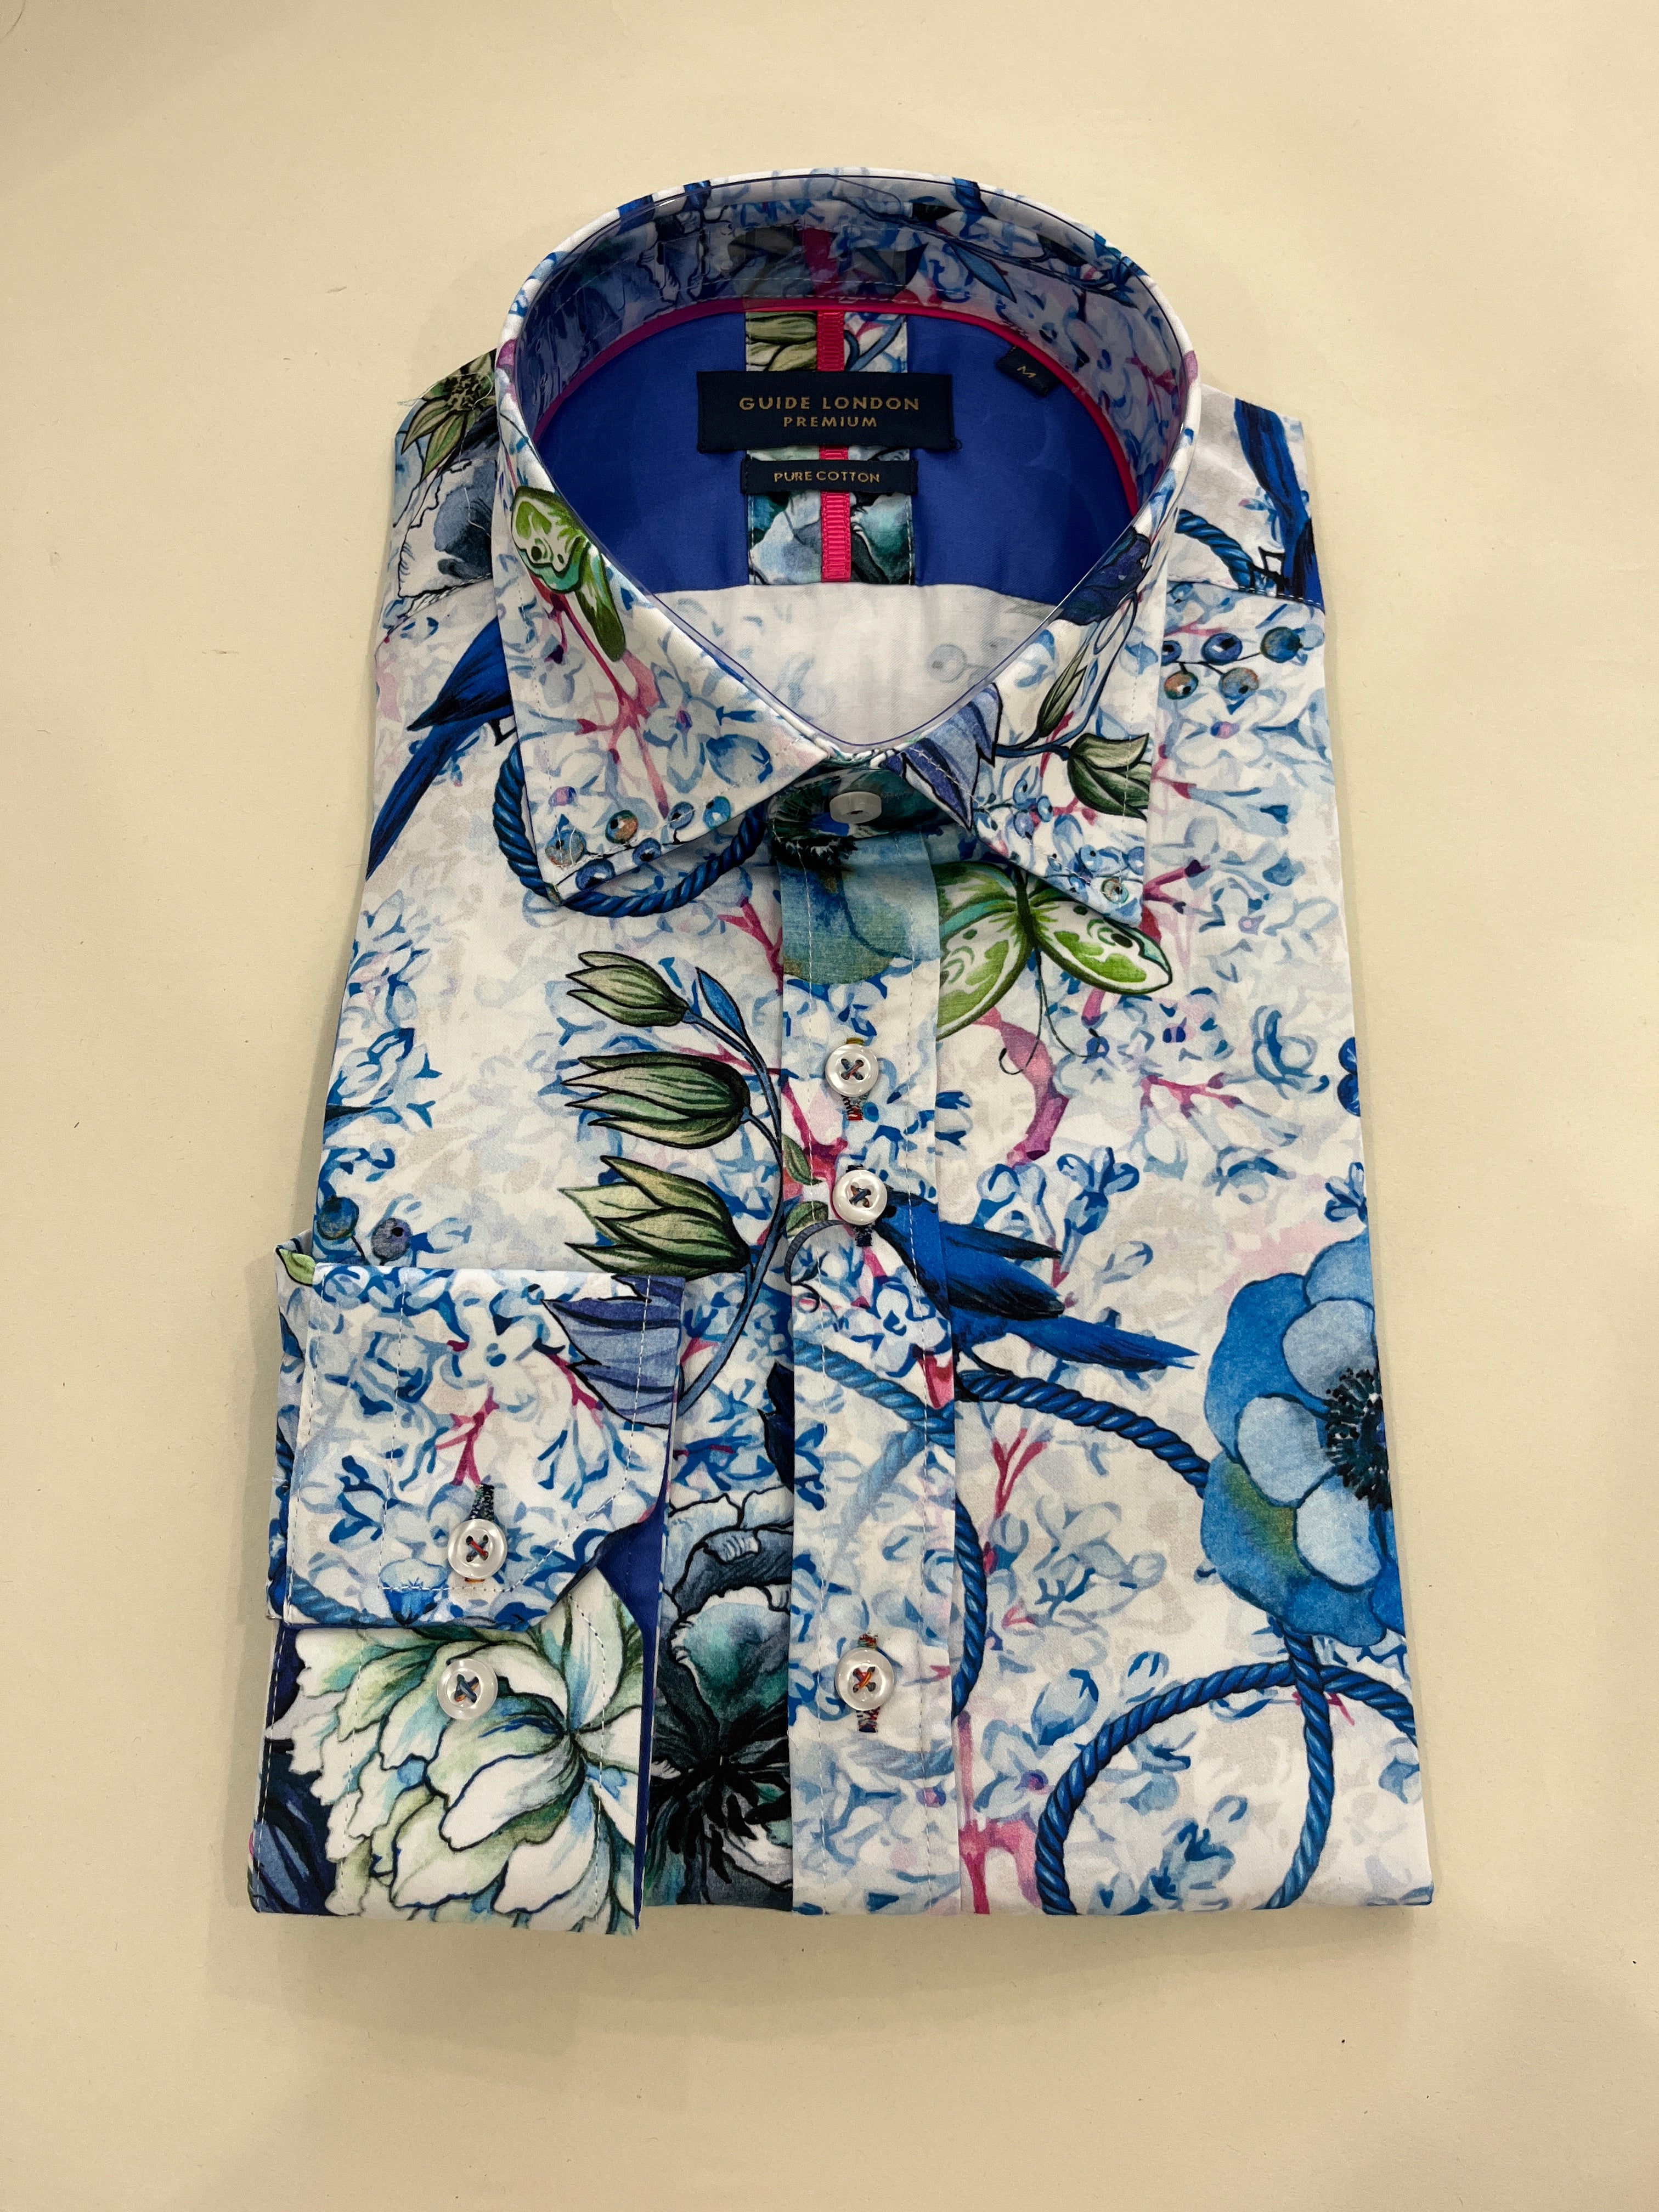 GUIDE LONDON WHITE SHIRT WITH ELECTRIC BLUE BIRD, GREEN BUTTERFLY AND BIG FLOWERS PRINT